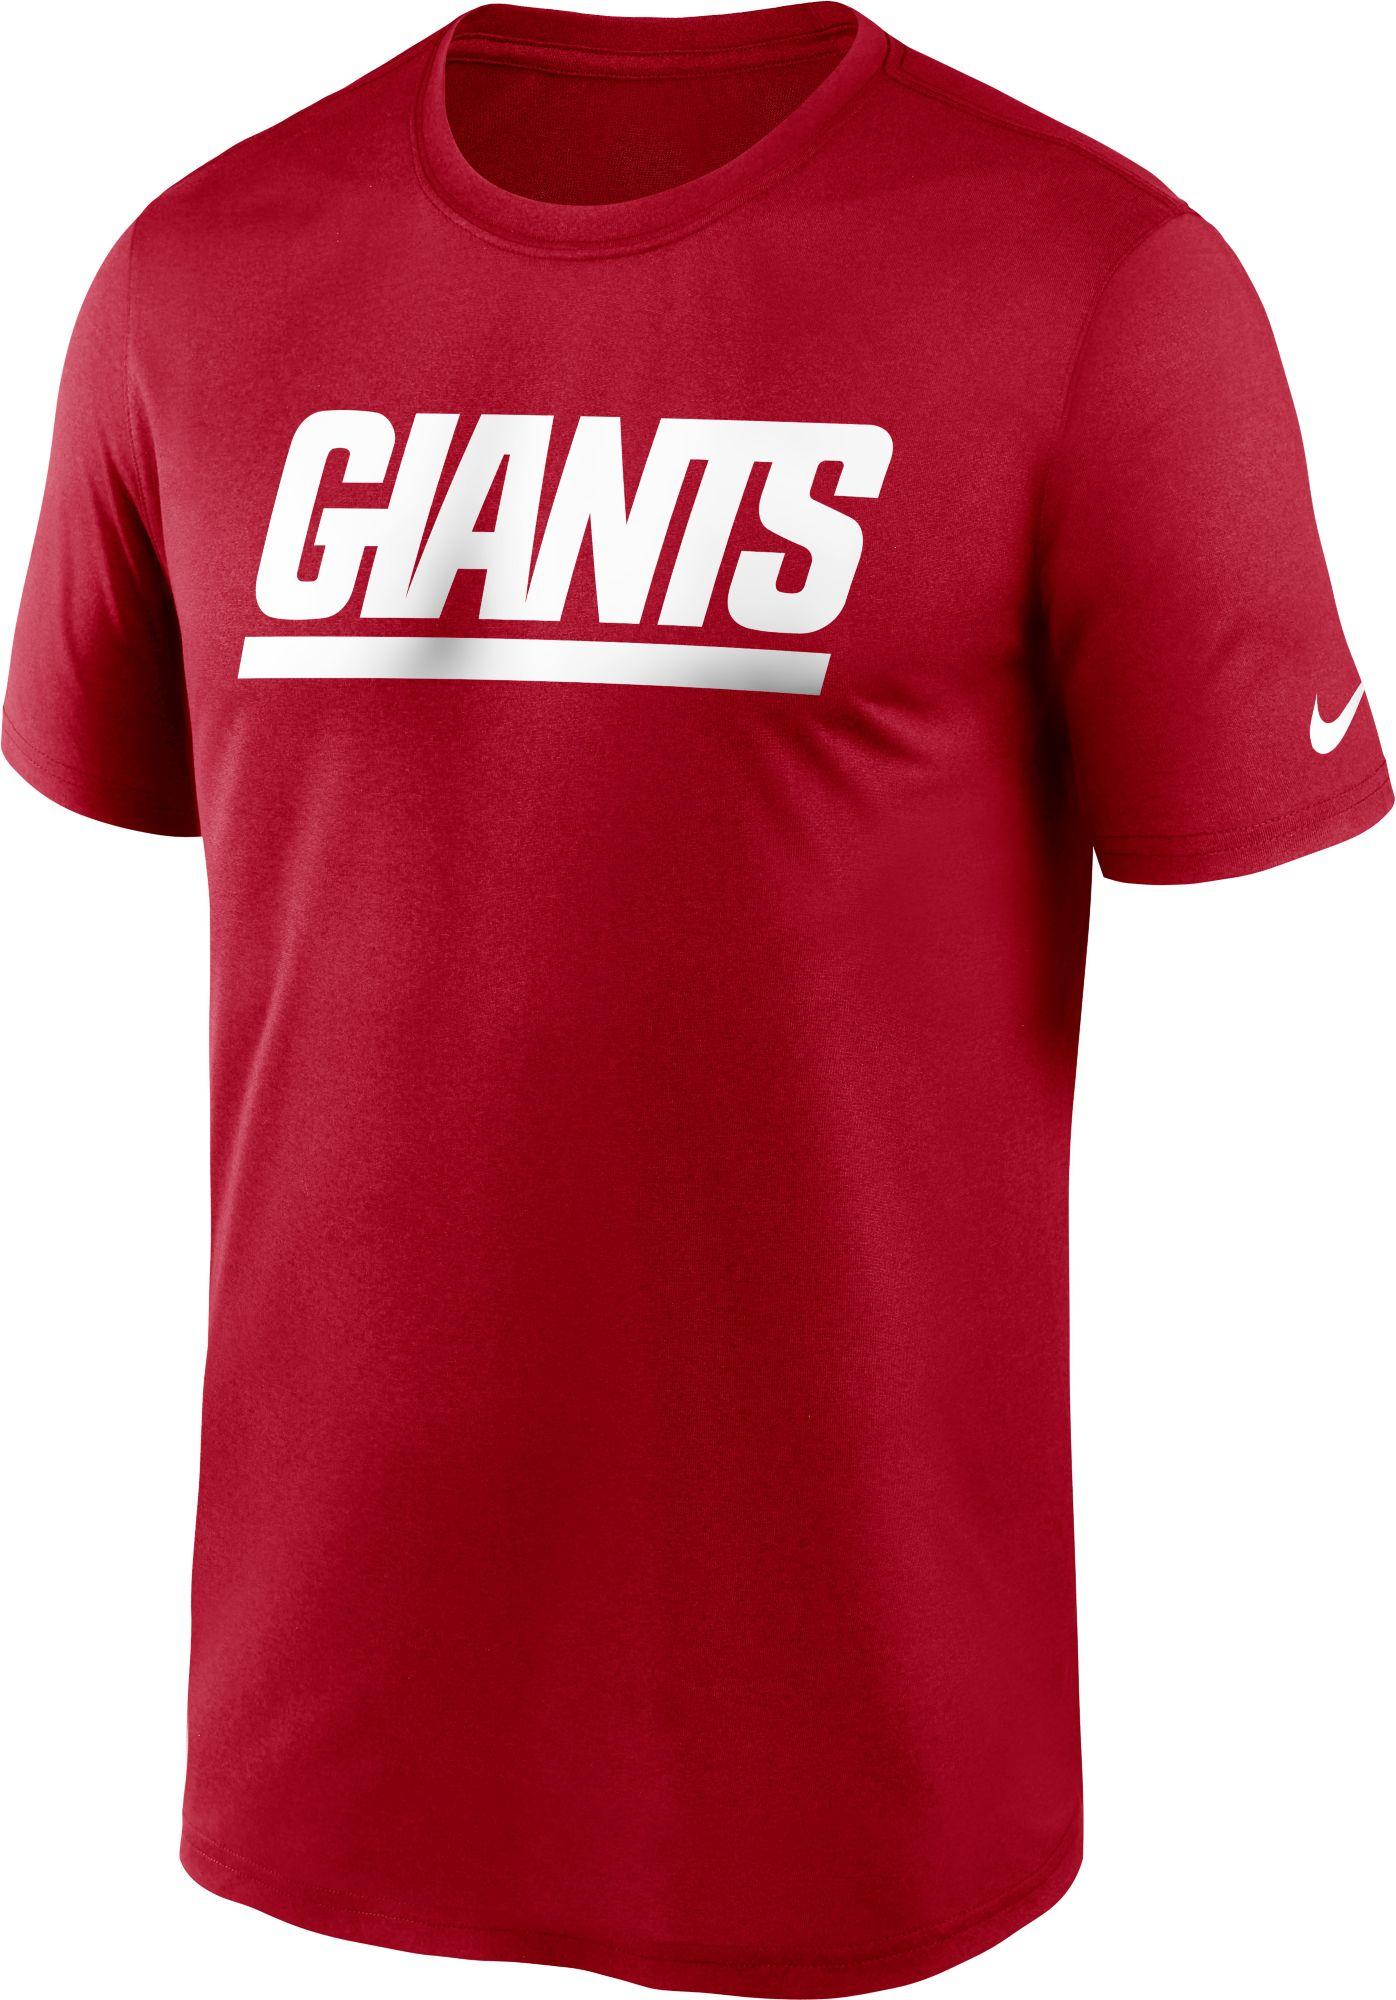 Nike New York Giants Sideline Dri-fit Cotton T-shirt in Red for Men - Lyst